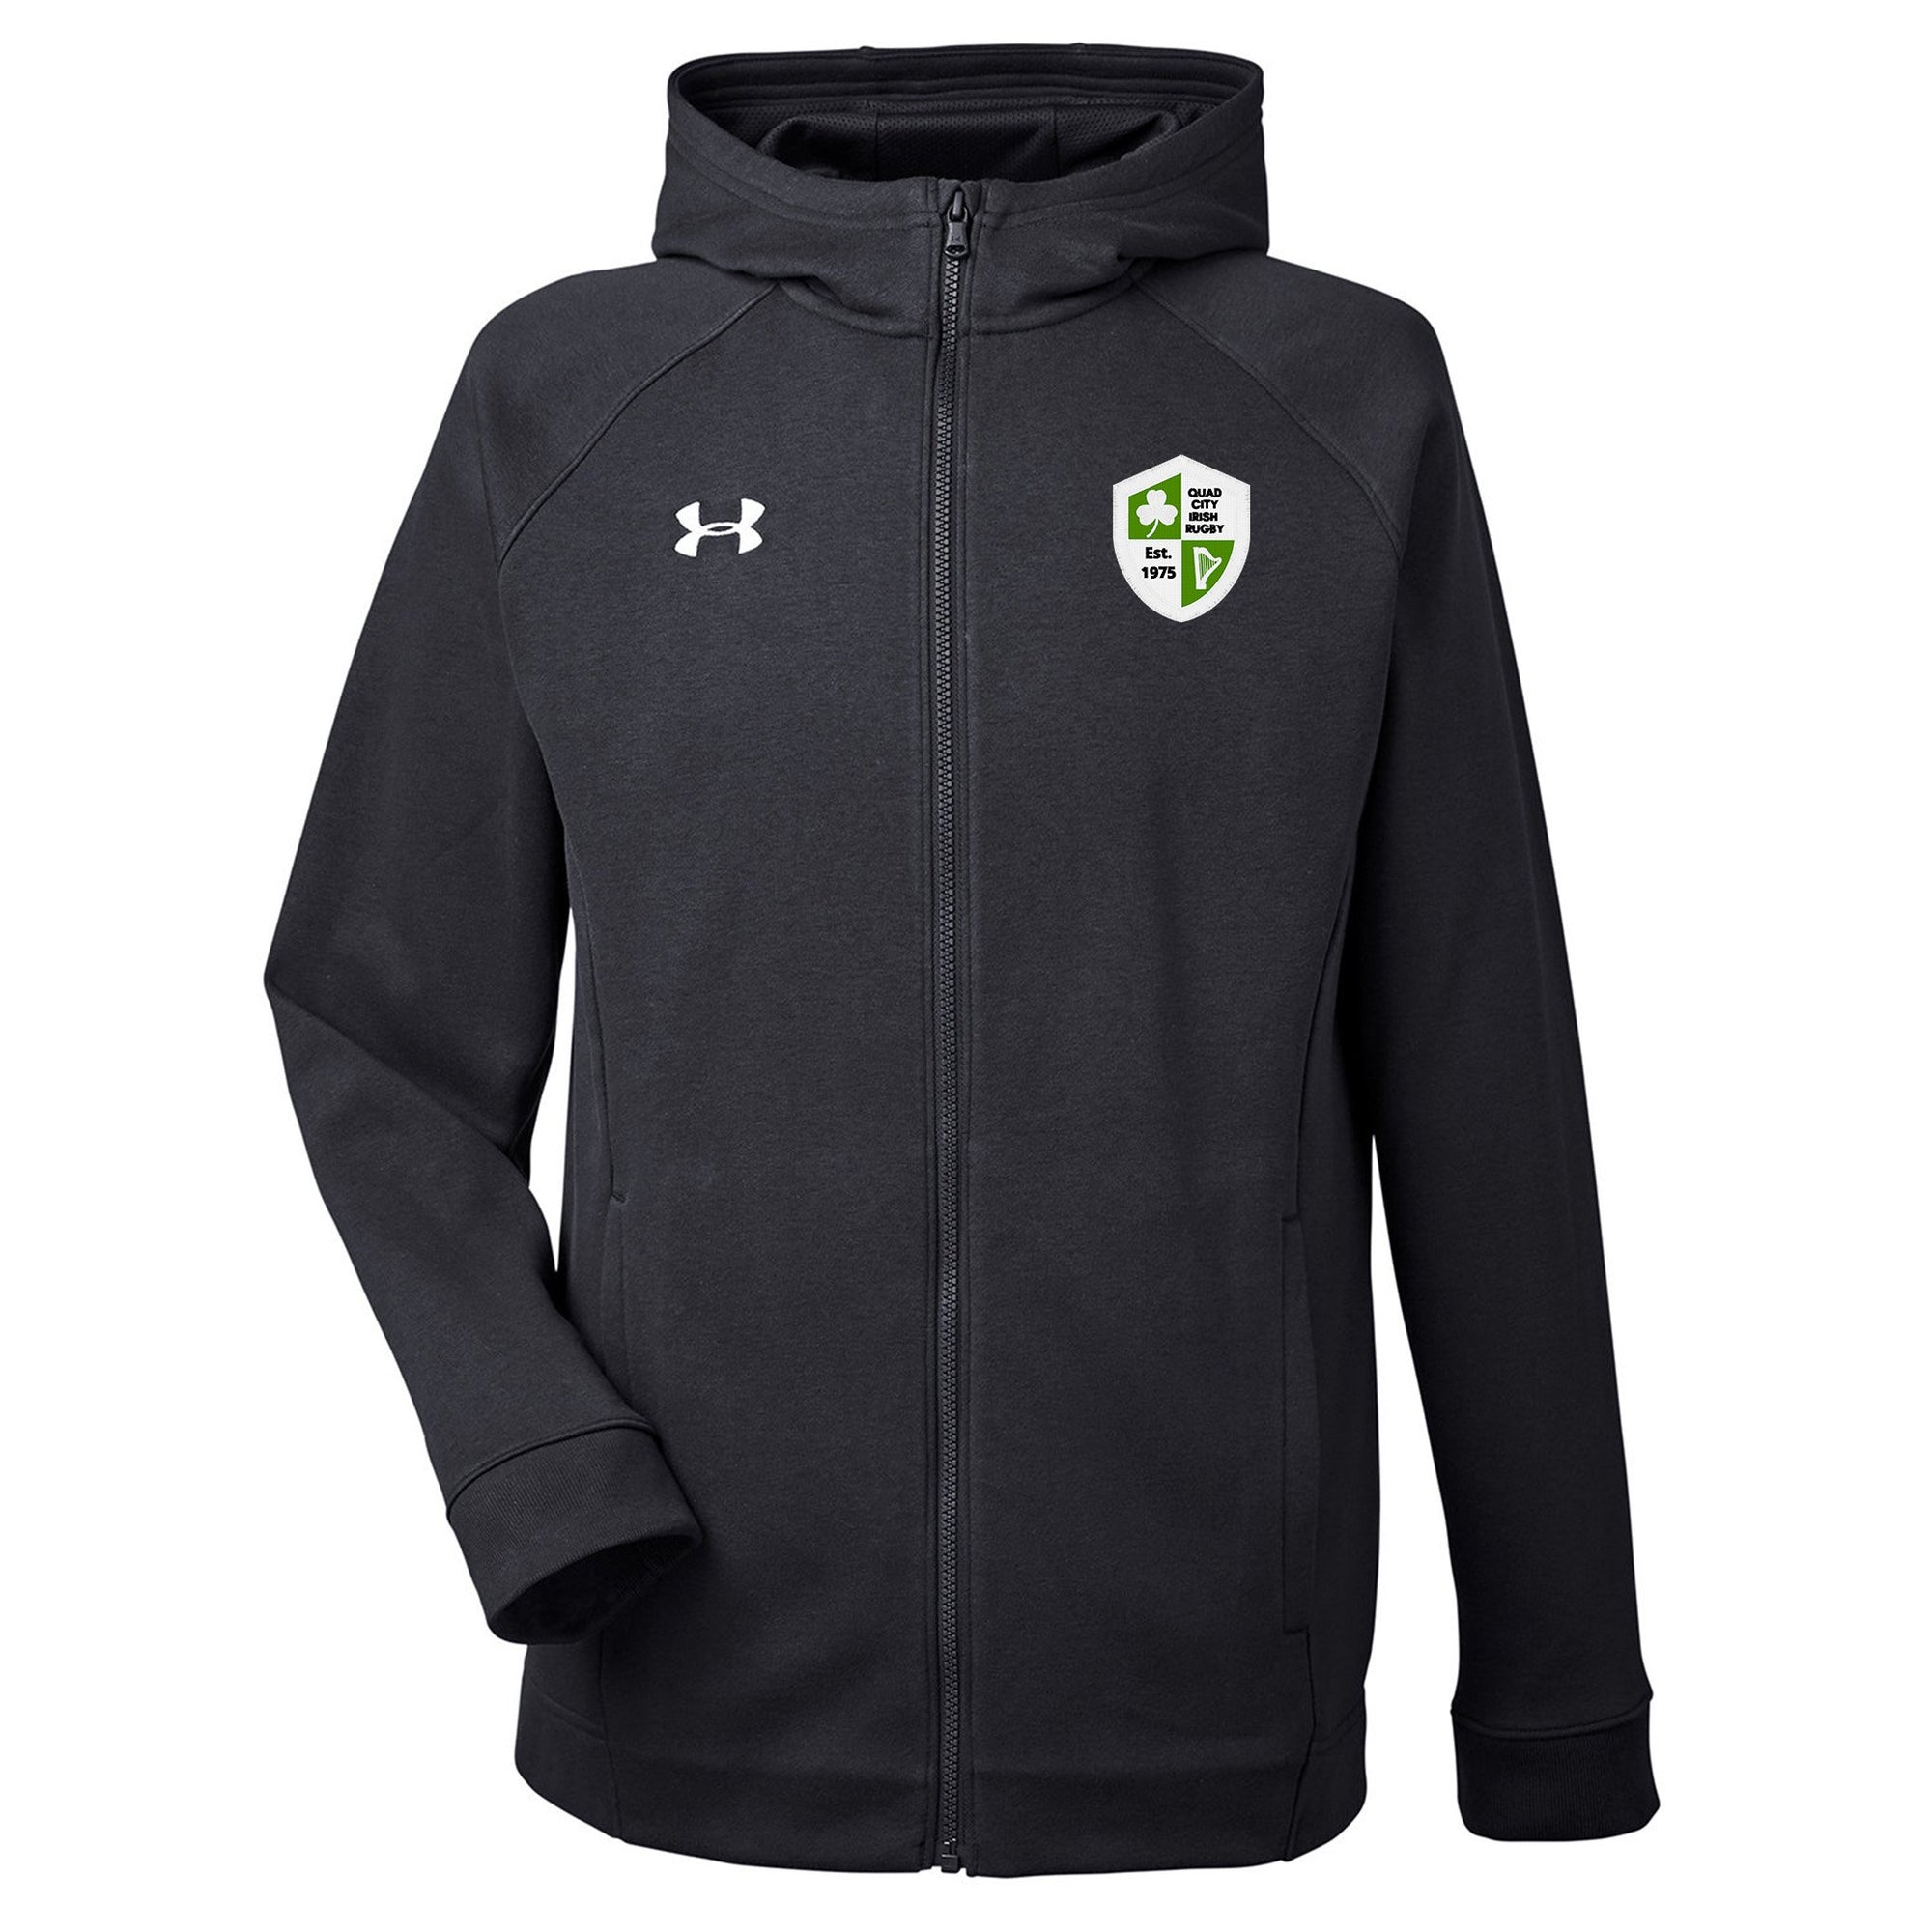 Rugby Imports Quad City Irish Rugby Hustle Zip Hoody